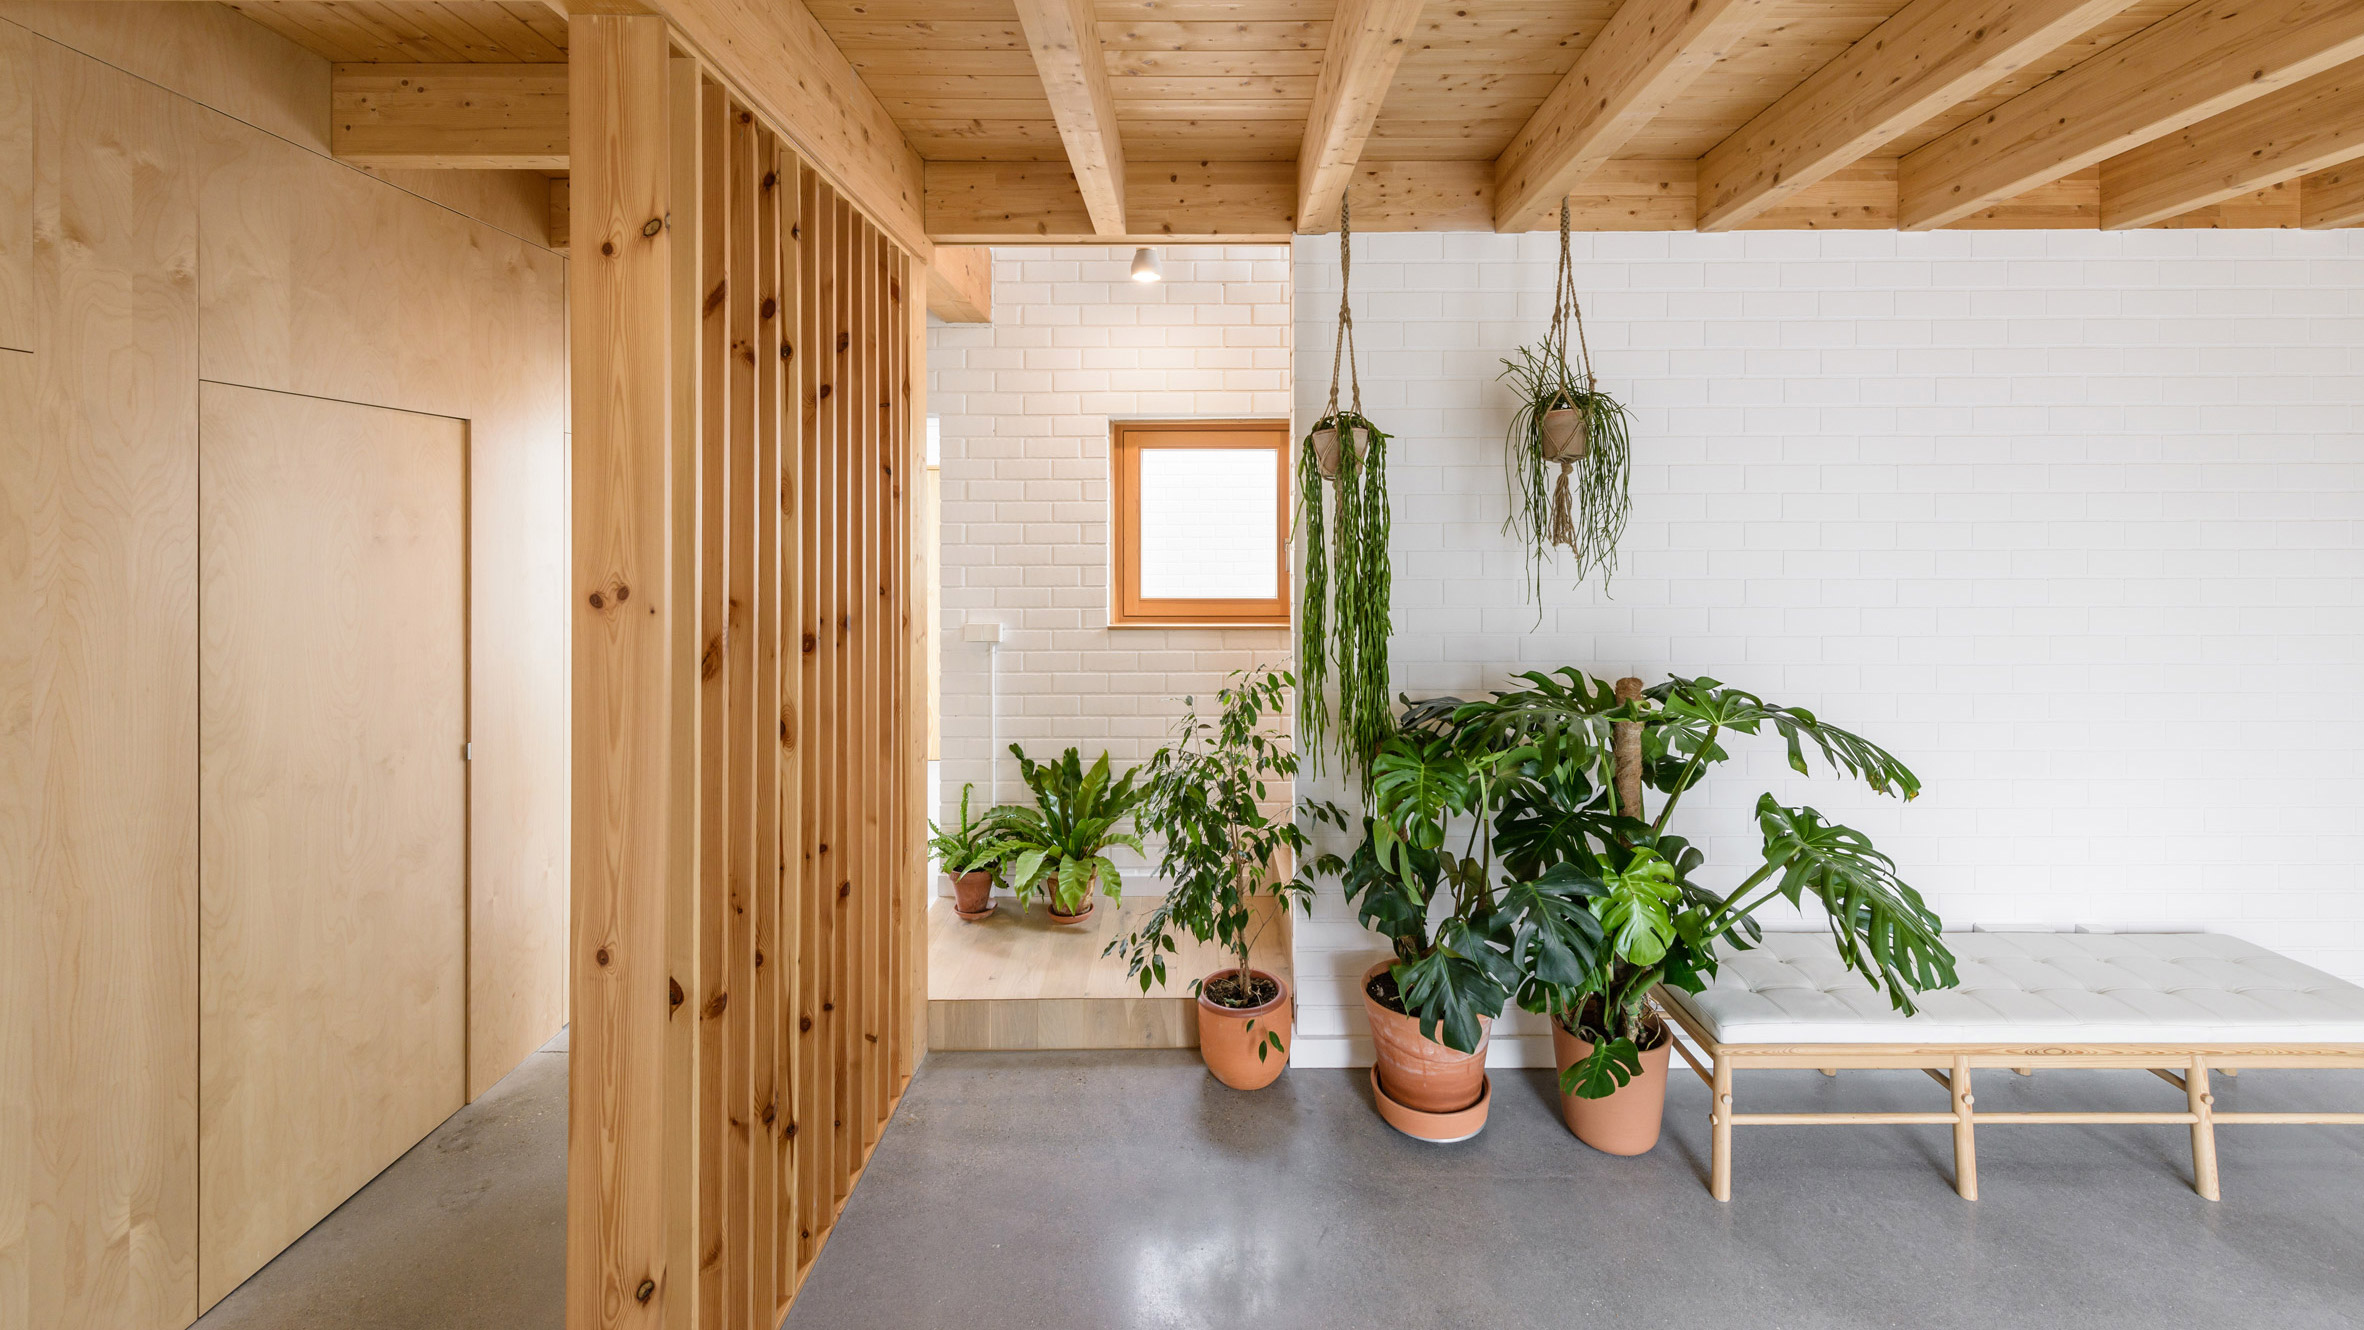 Domestic interiors with statement plants that bring nature indoors